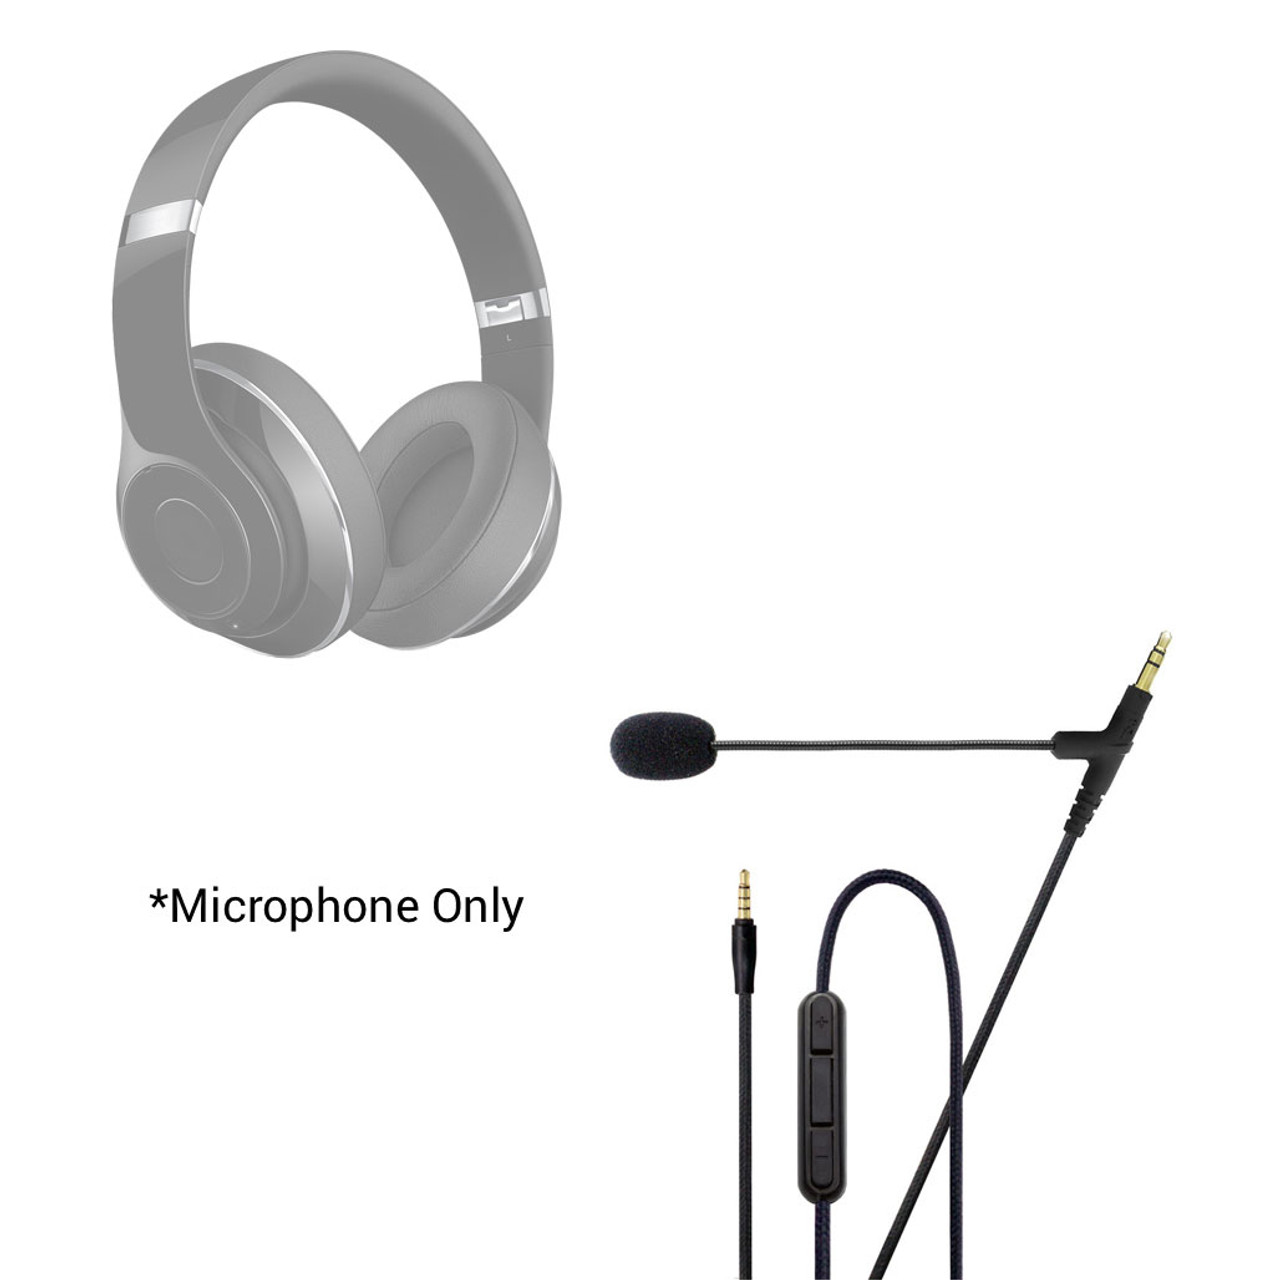 Microphone | Boom Mic For Headphones | Mic For Beats